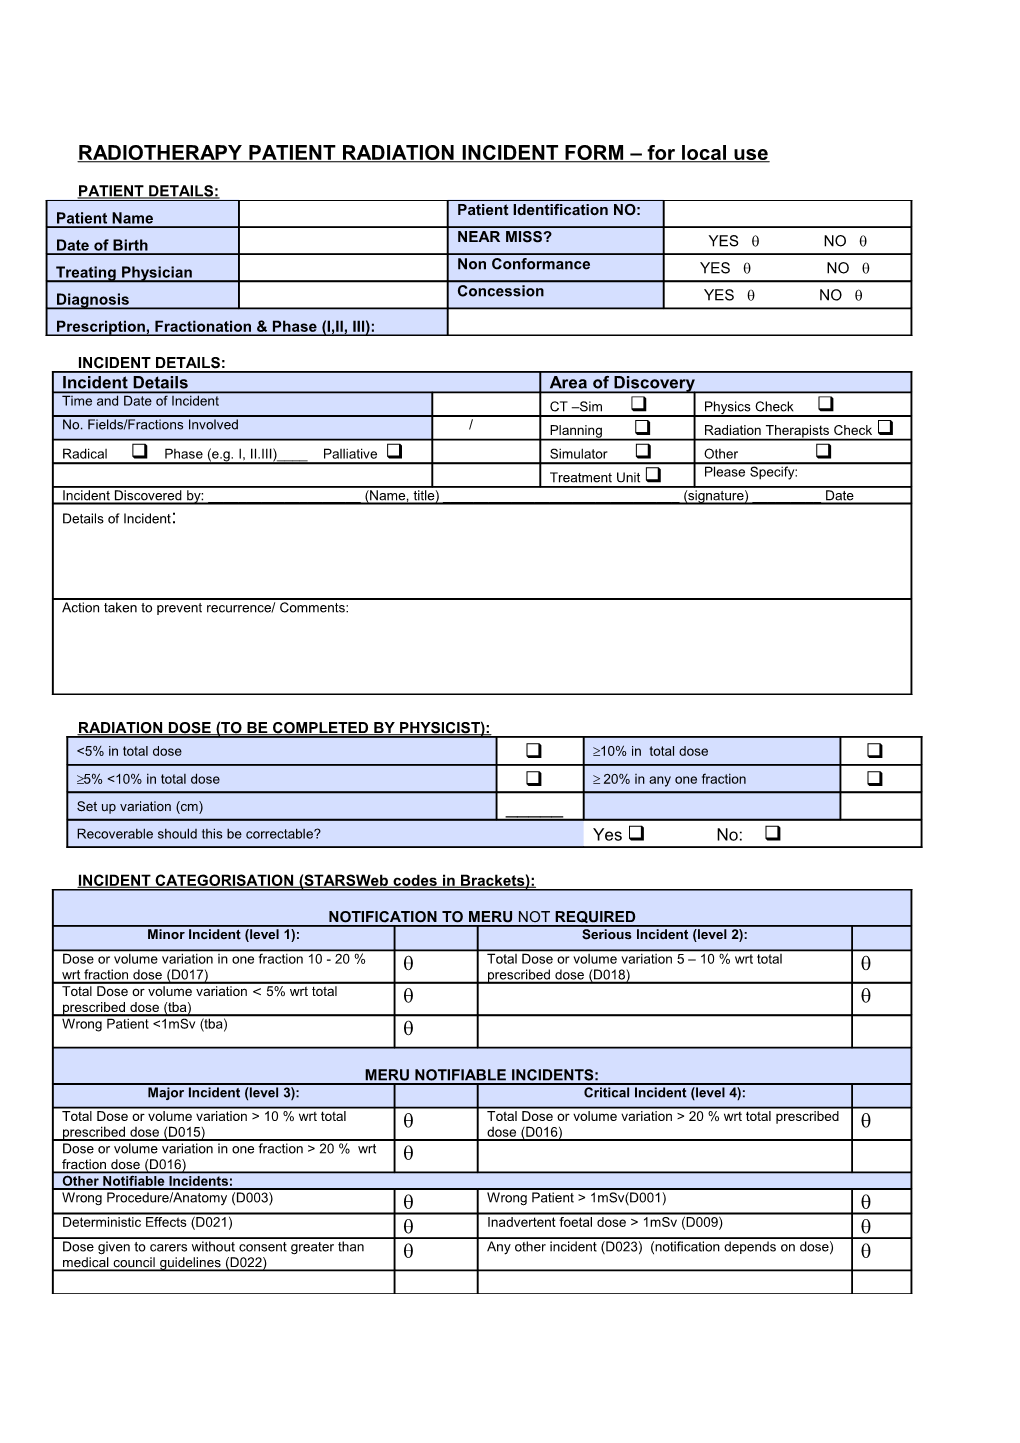 Radiotherapy Patient Radiation Incident Form